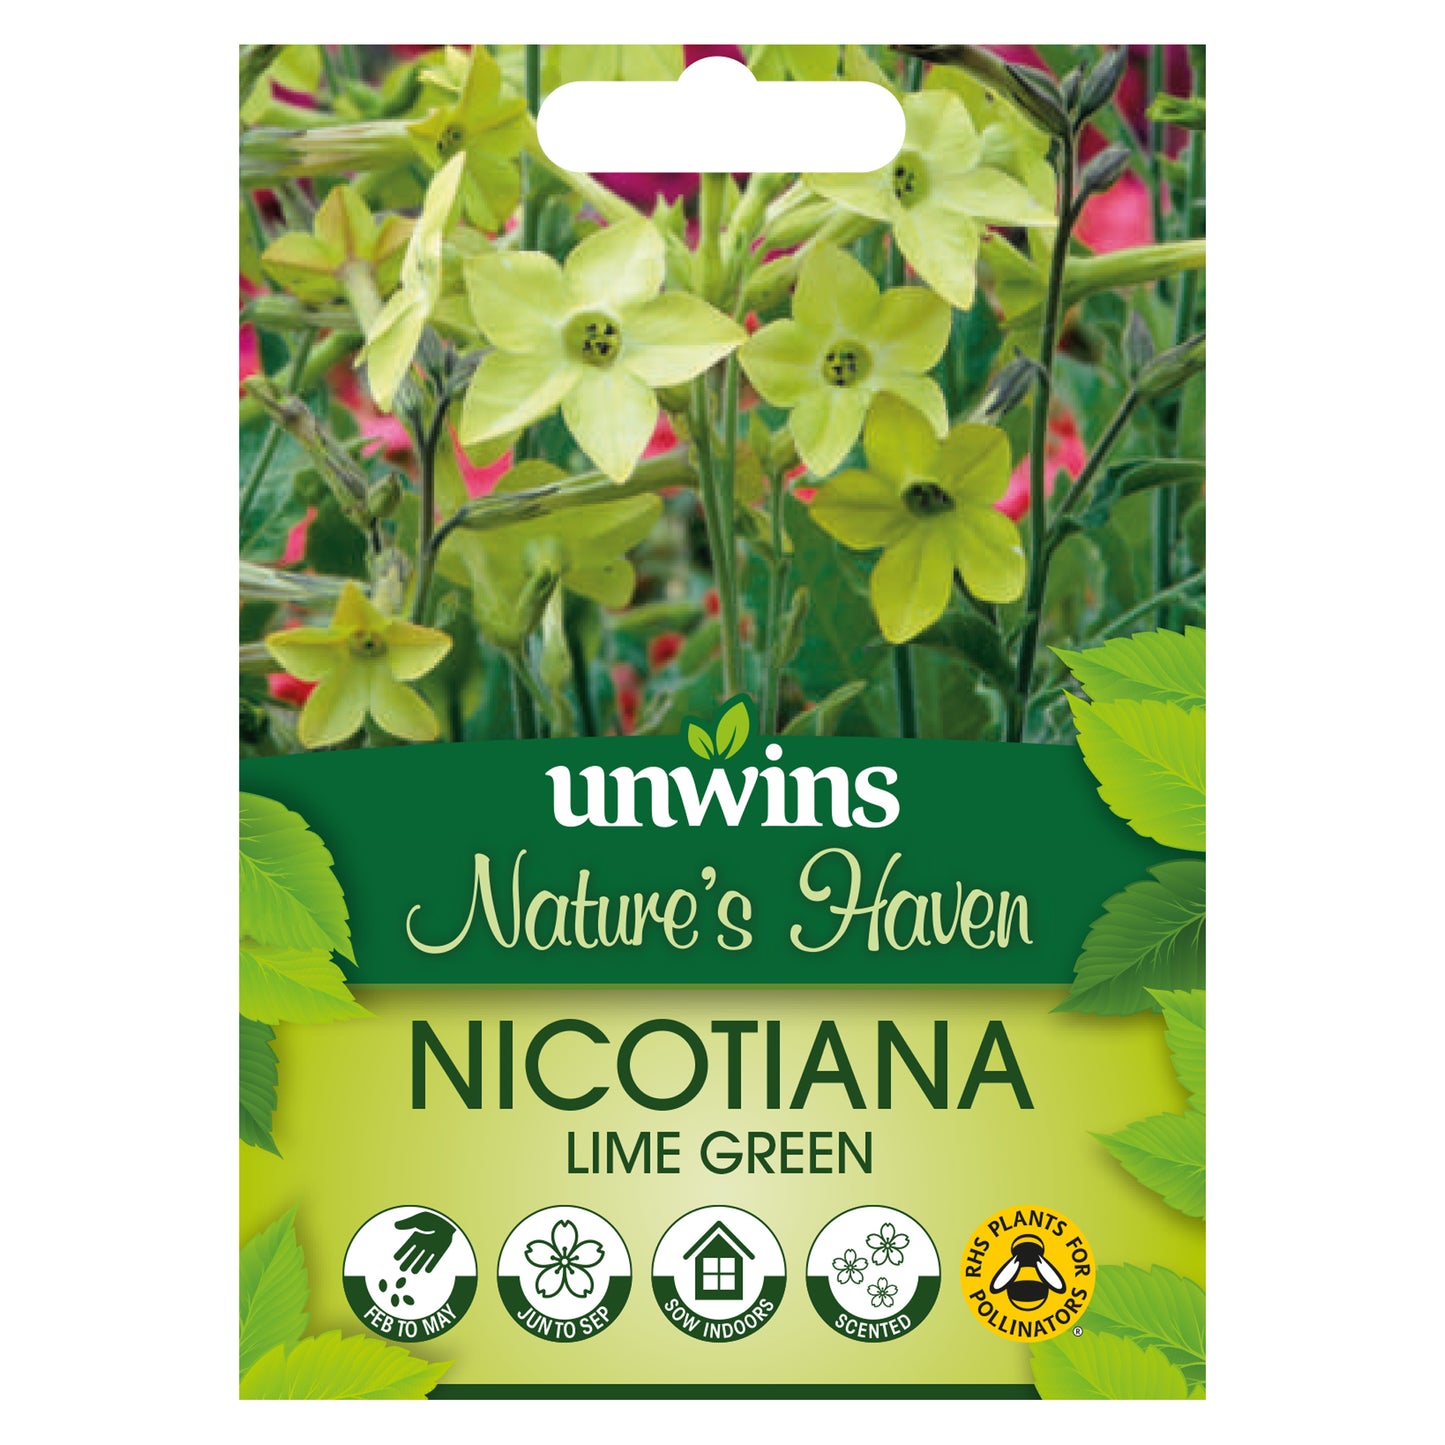 Nature's Haven Nicotiana Lime Green Seeds Front